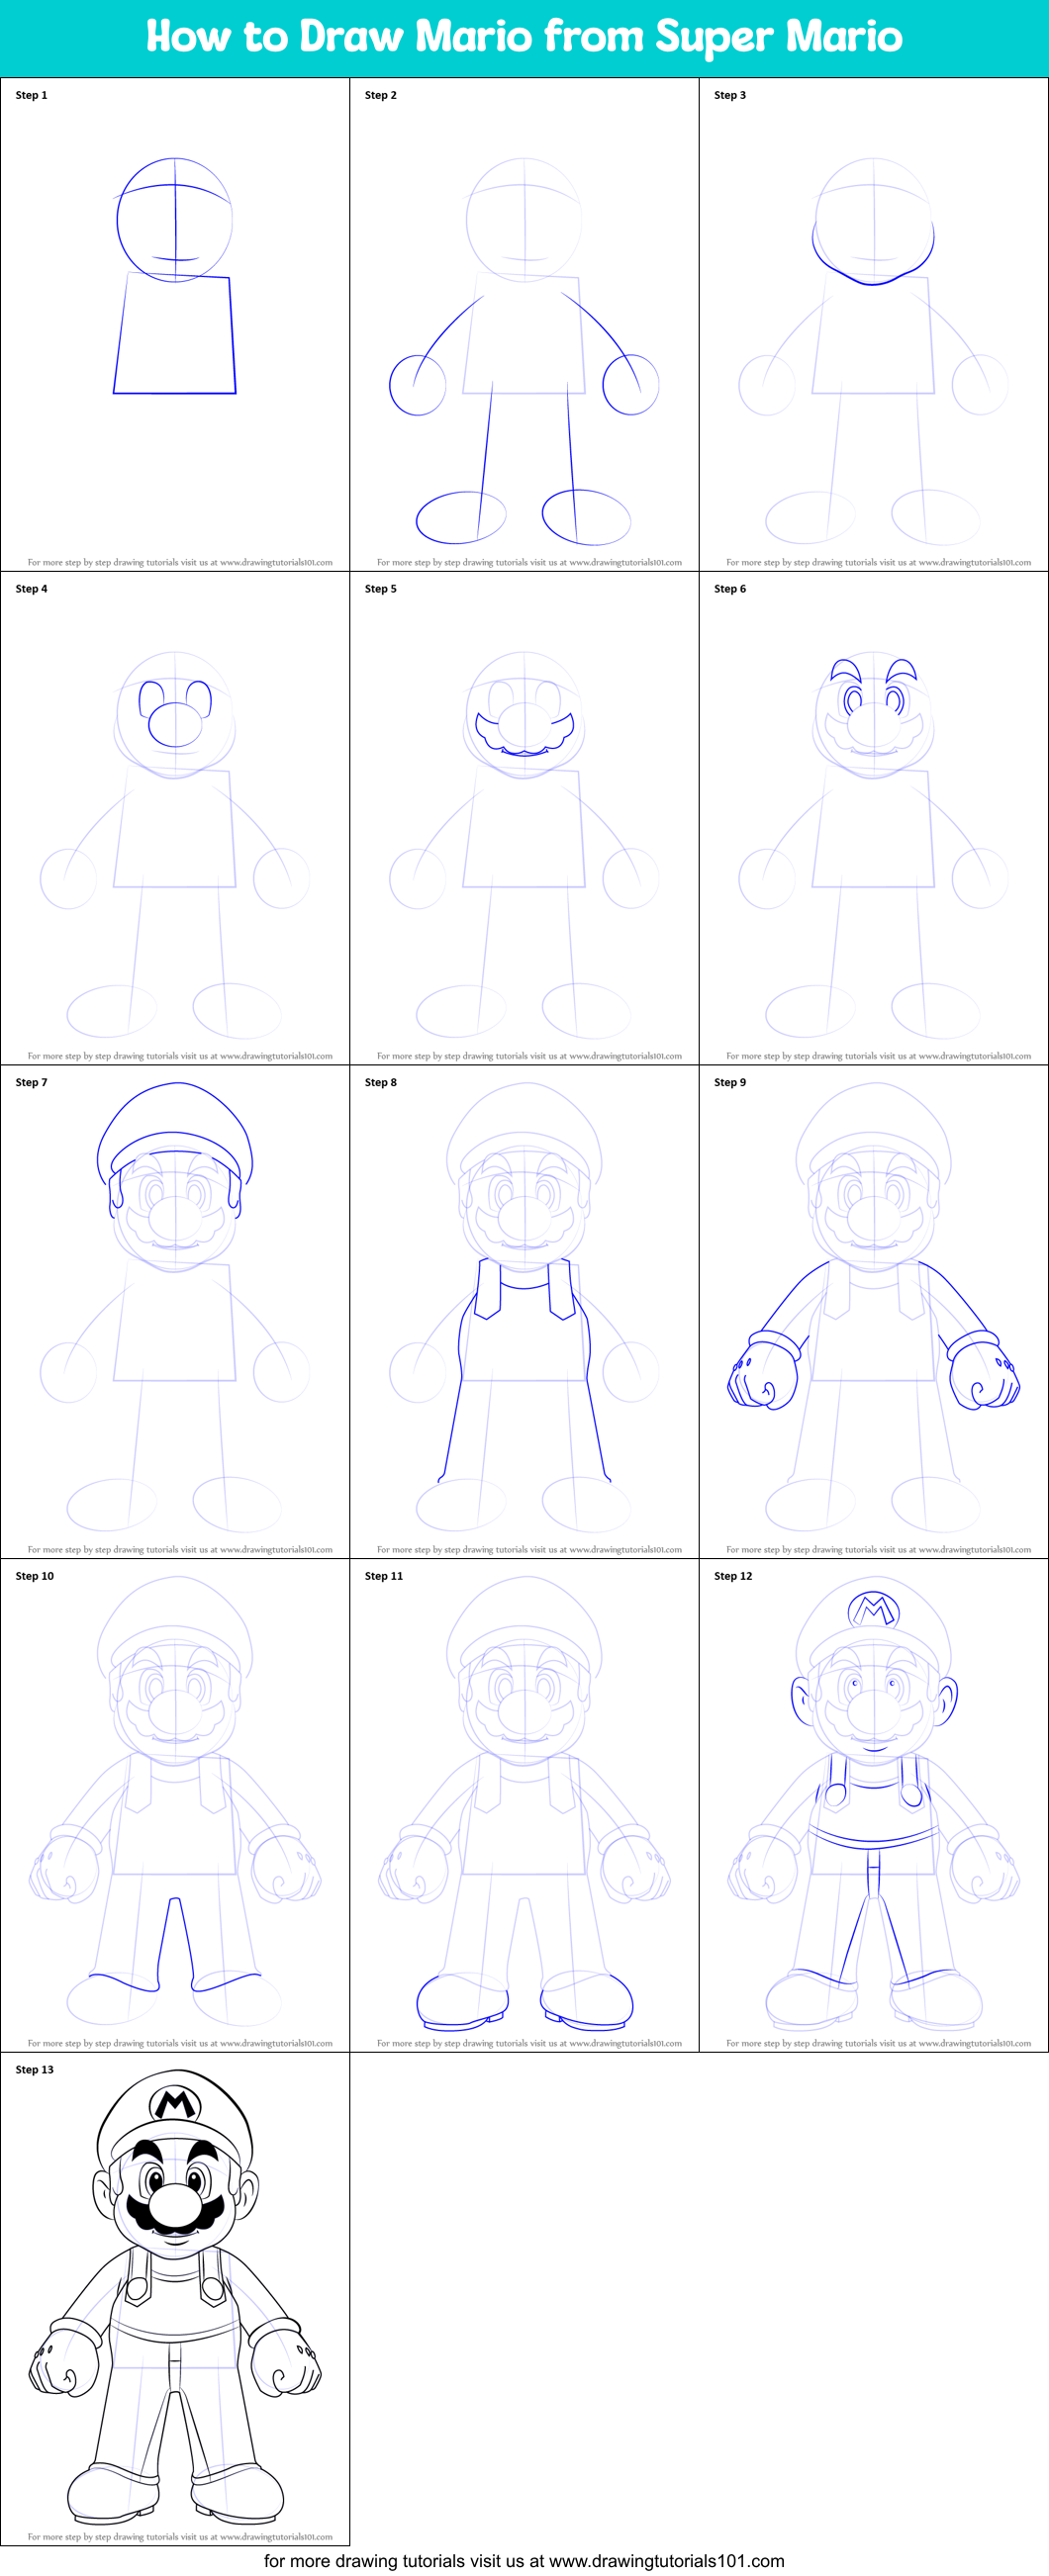 How to Draw Mario from Super Mario printable step by step drawing sheet